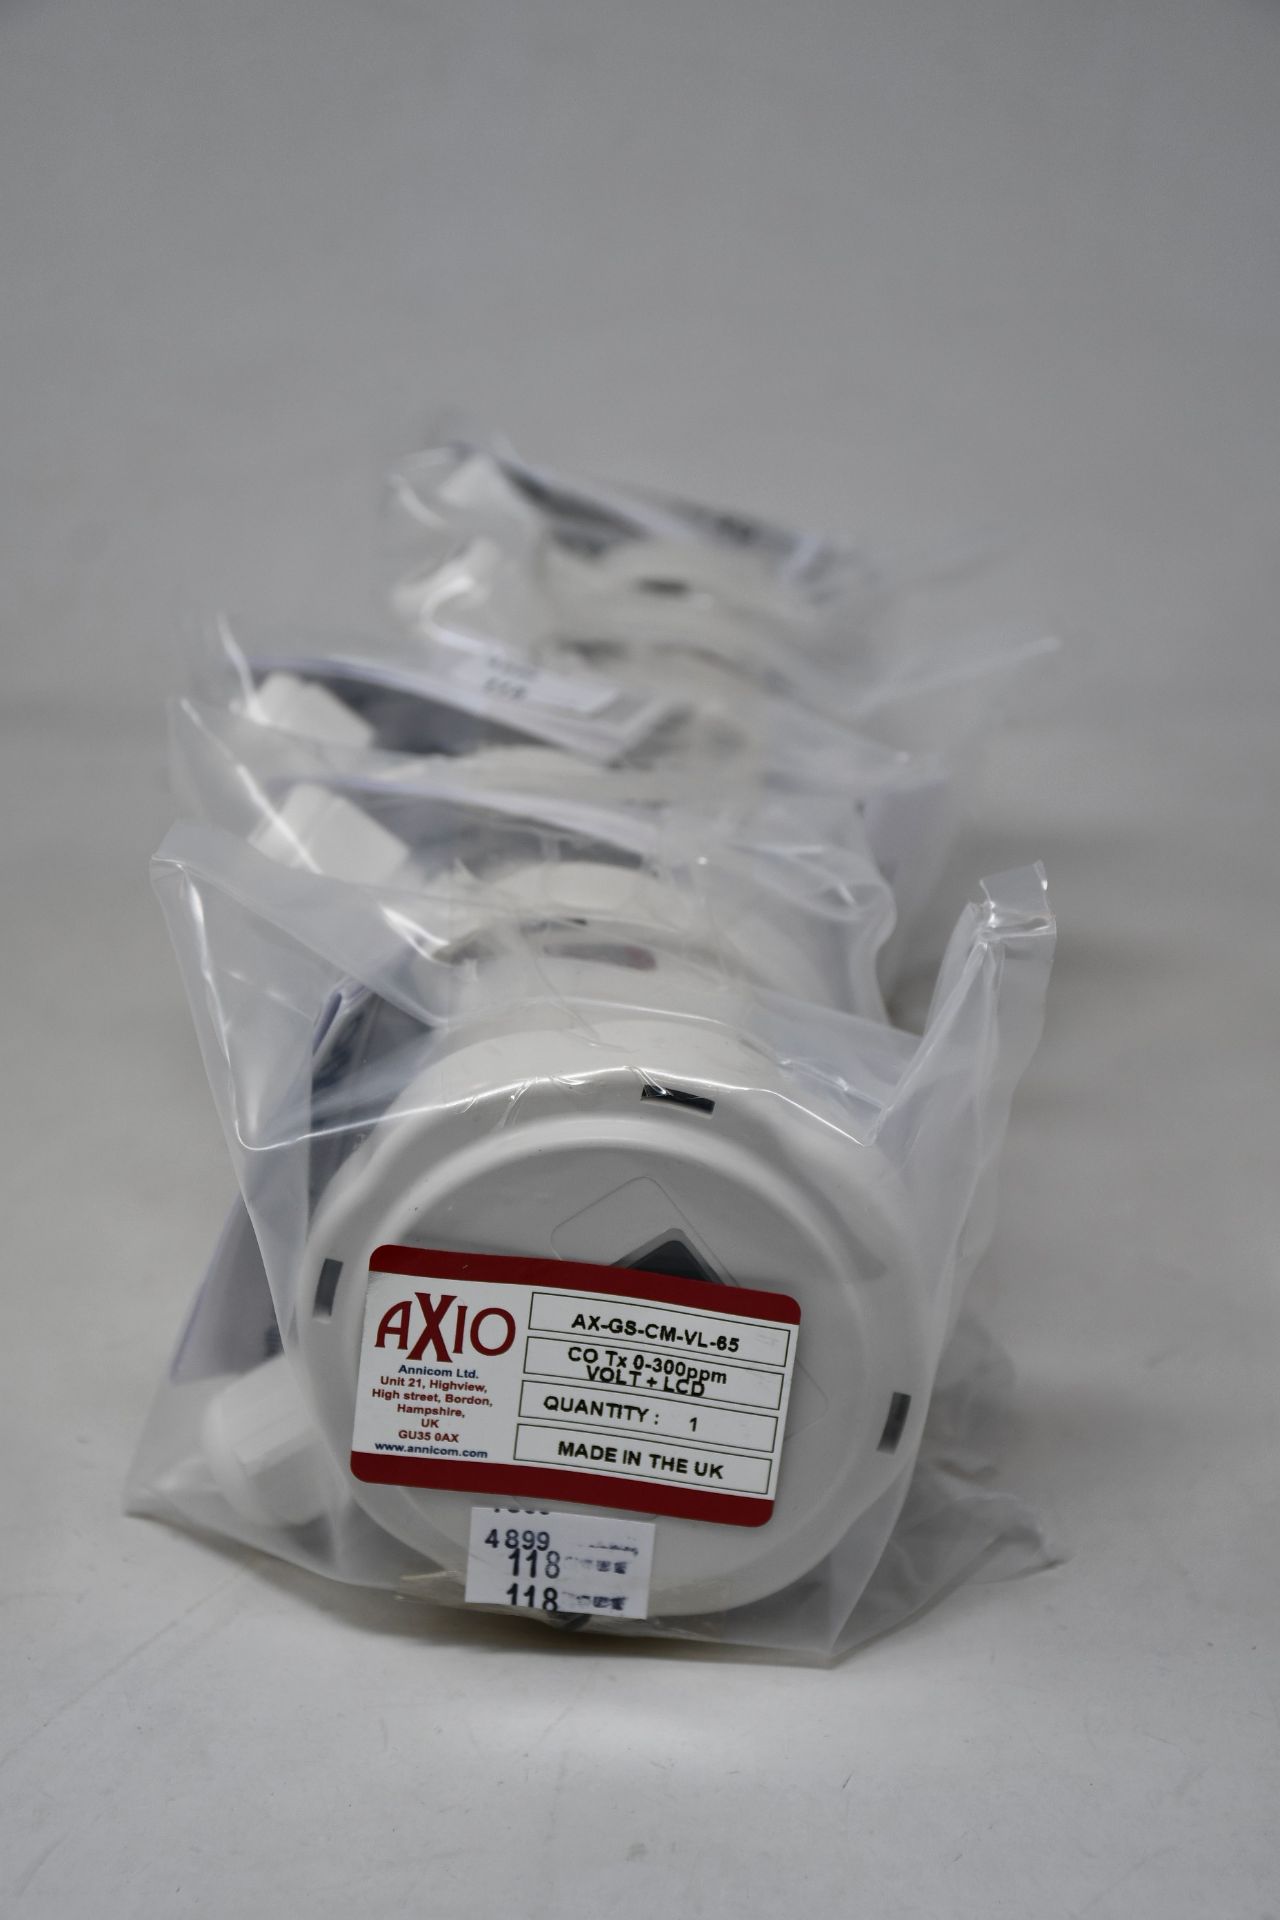 Five as new Axio carbon monoxide sensors with LCD display (AX-GS-CM-VL 65).